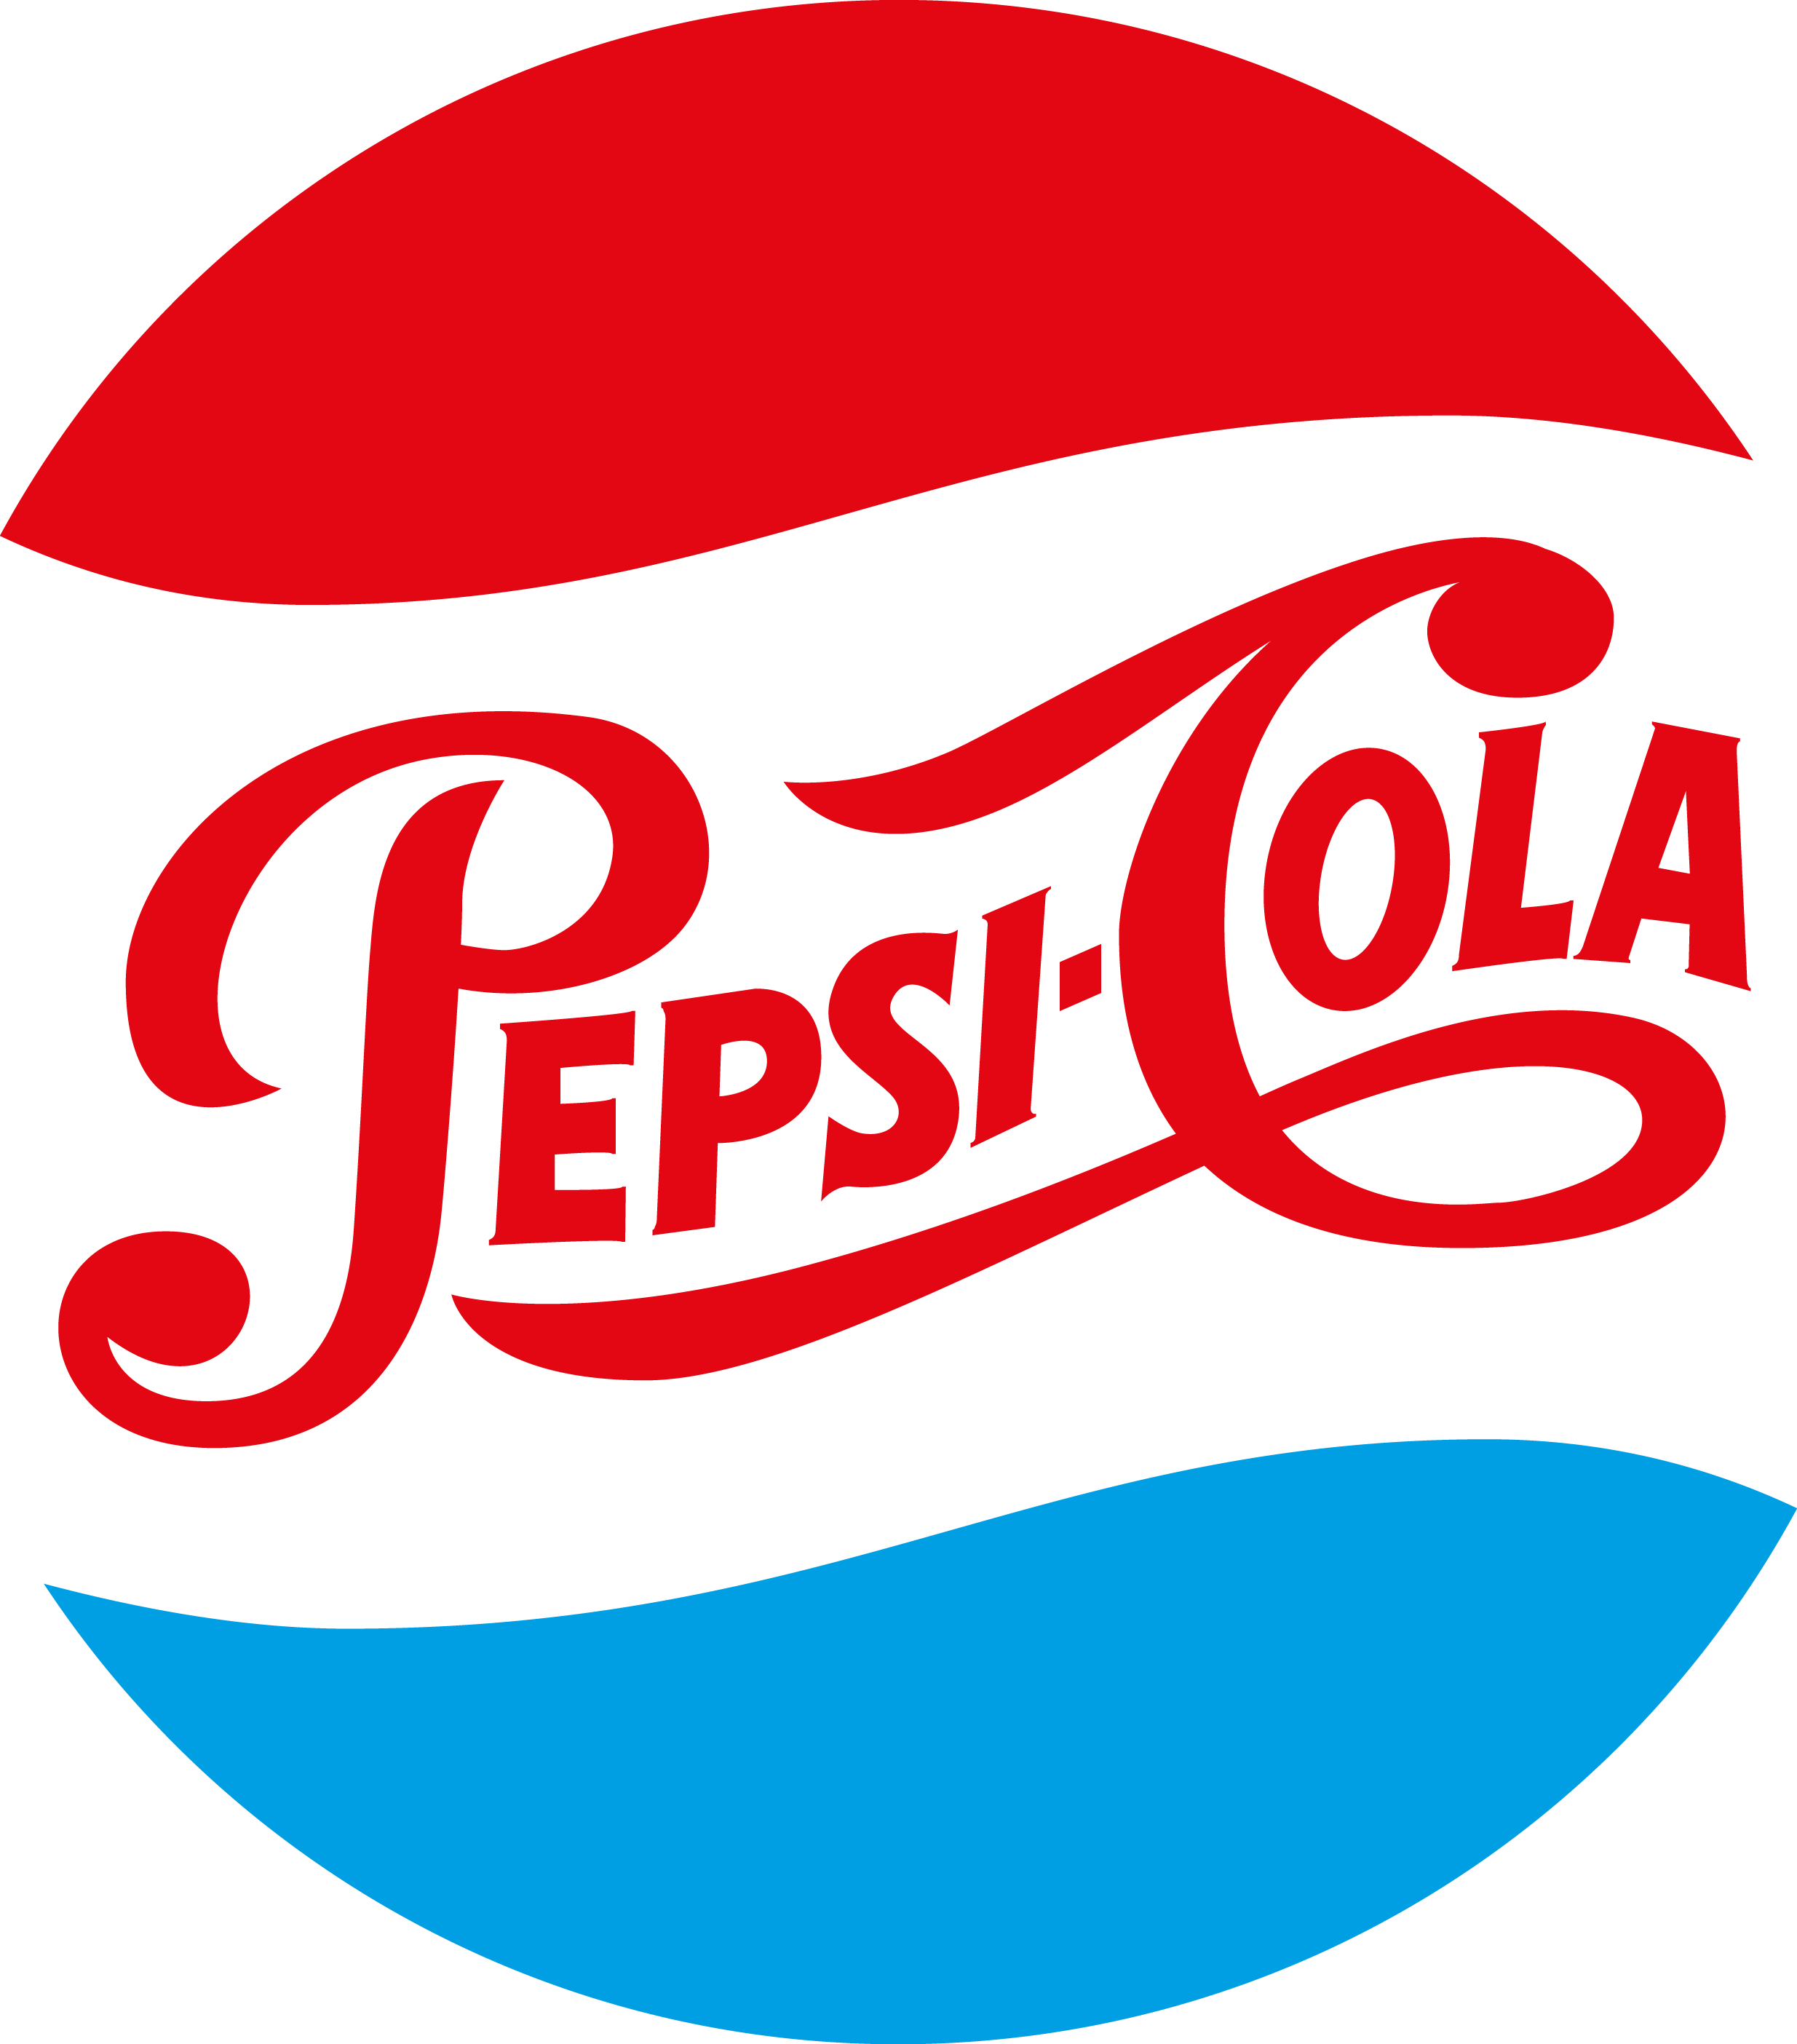 PepsiCo is a global food and beverage company